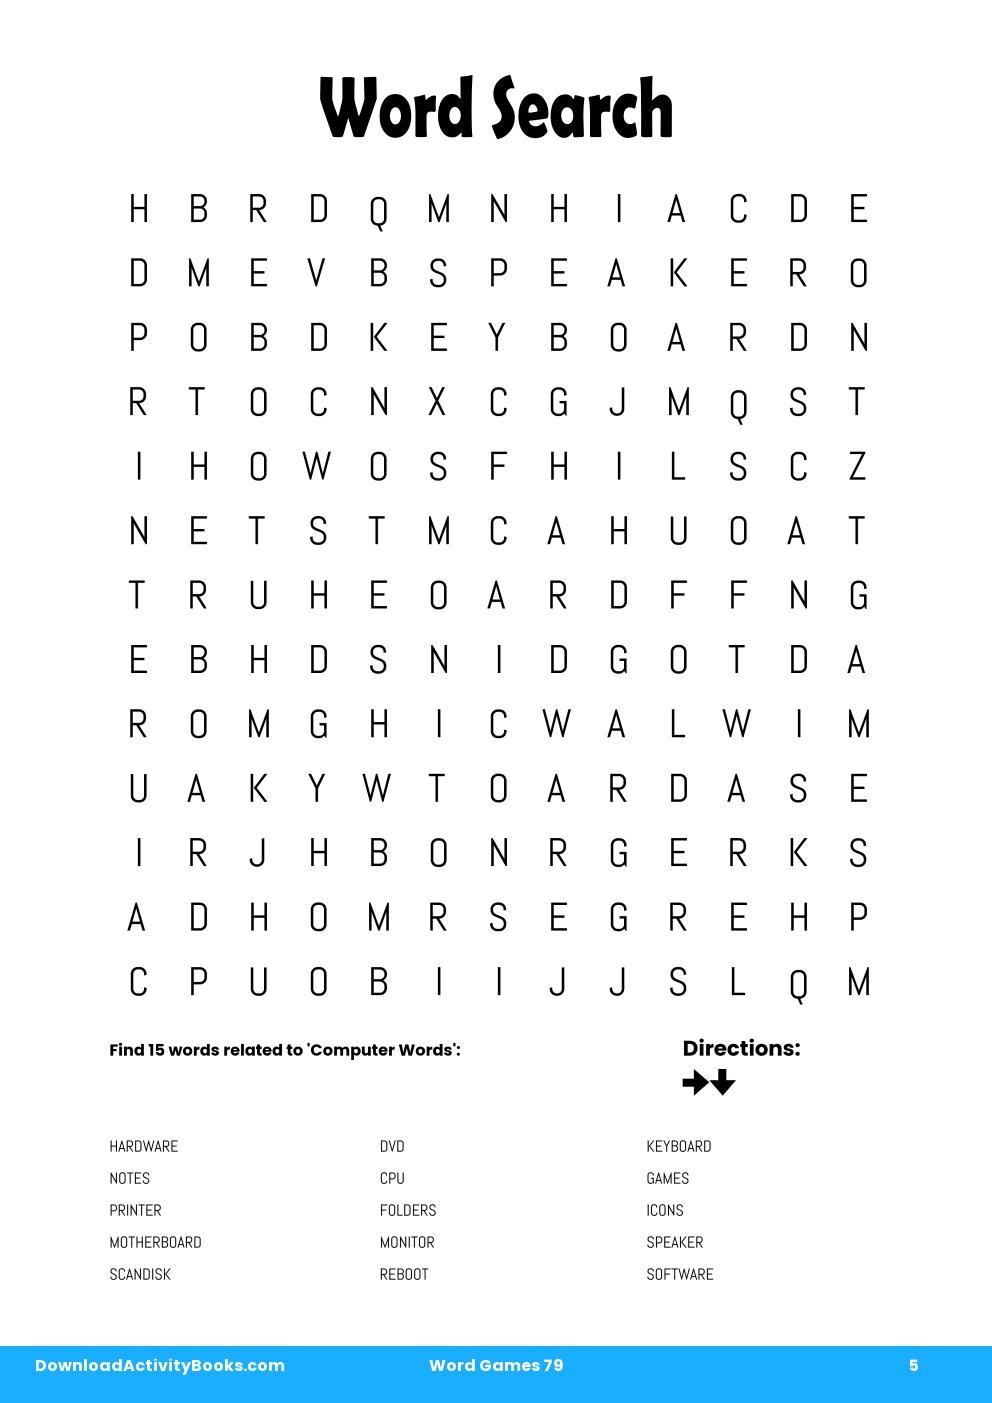 Word Search in Word Games 79